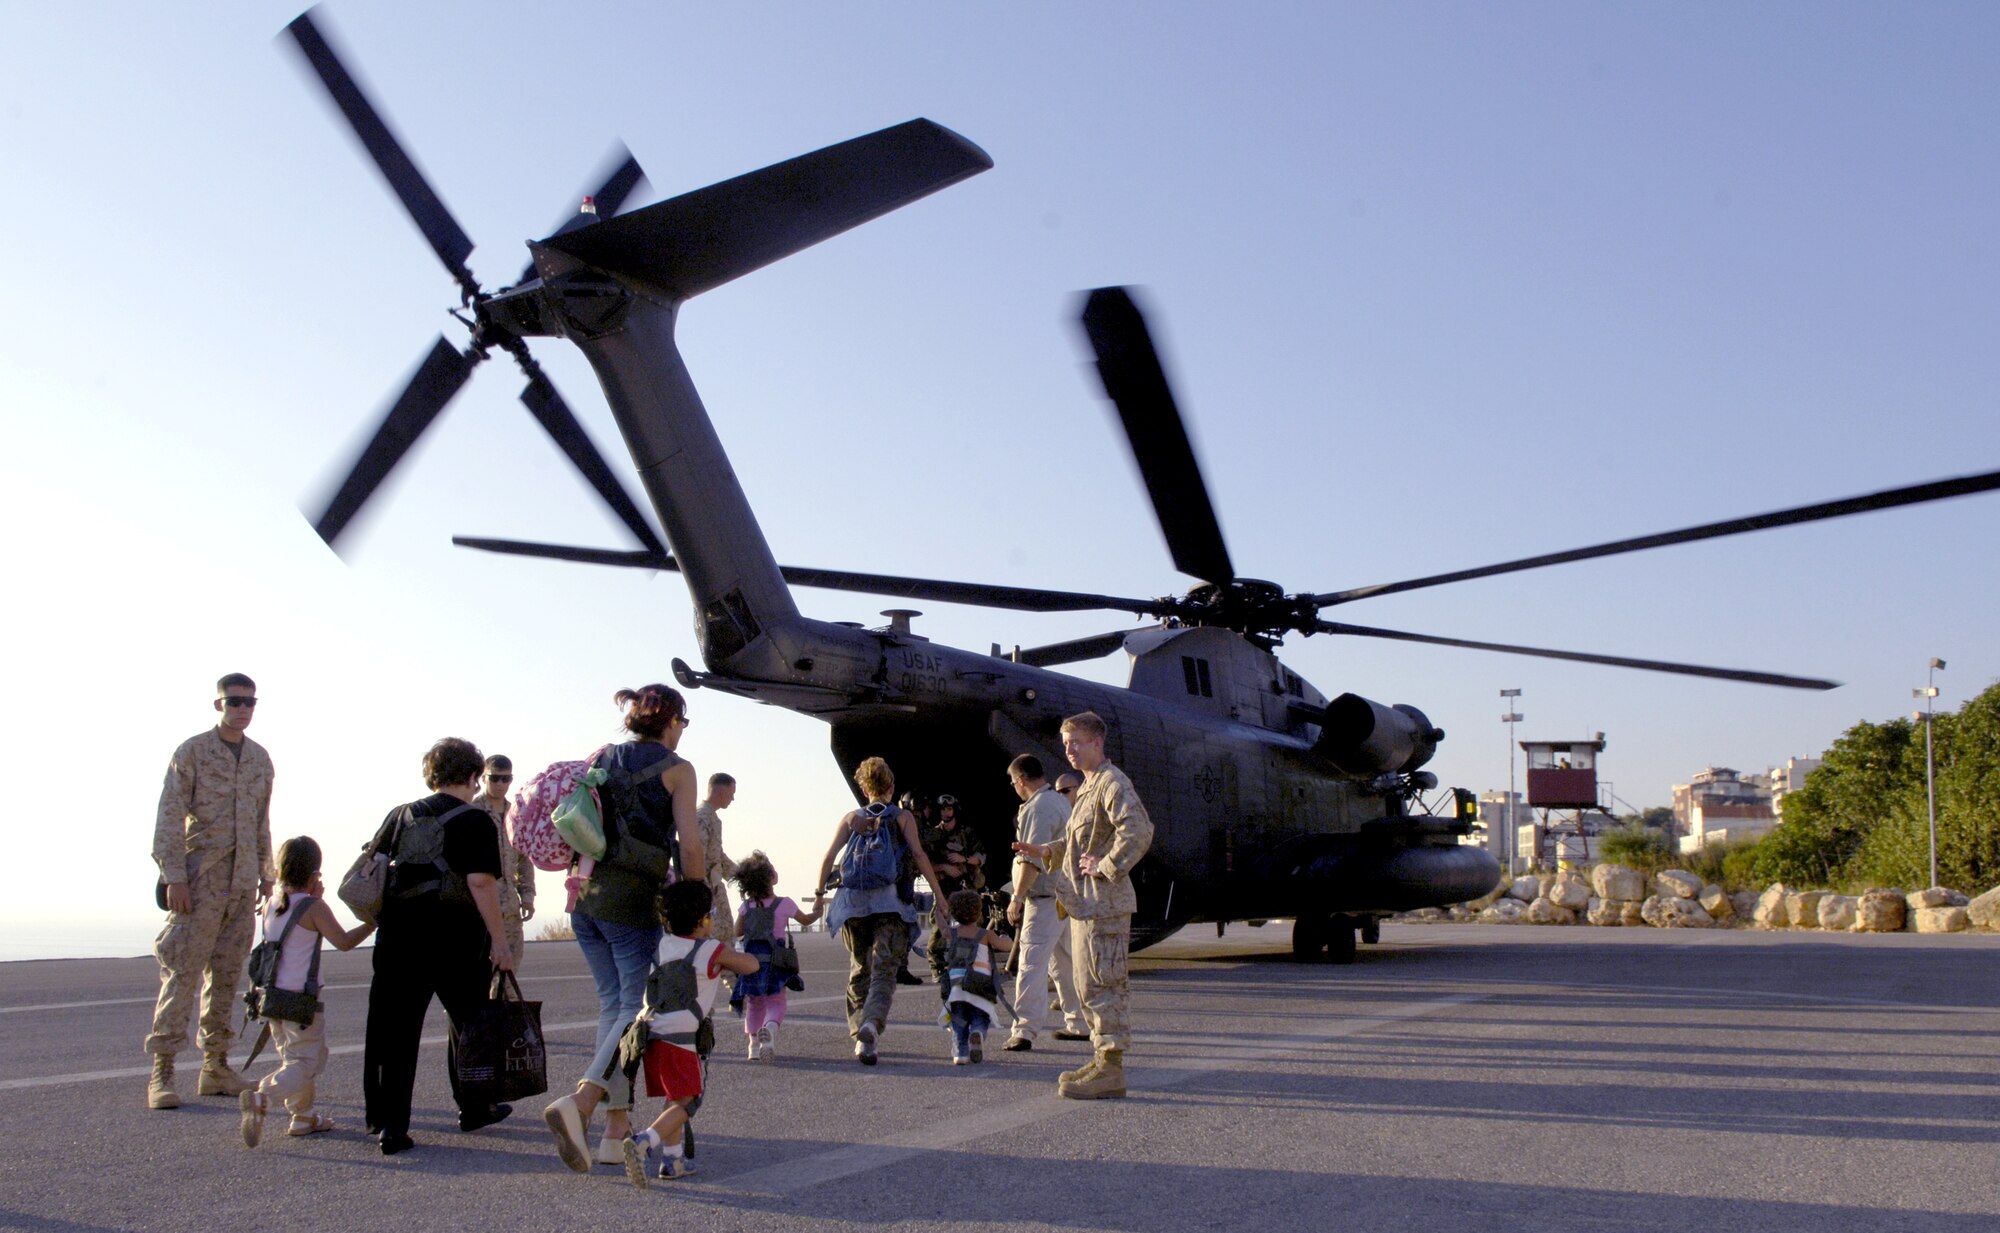 BEIRUT, Lebanon (AFPN) -- U.S. citizens board an MH-53M Pave Low helicopter here July 24. The helicopter is part of the 352nd Special Operations Group at Royal Air Force Mildenhall, England. (U.S. Air Force photo/Senior Airman Brian Ferguson)